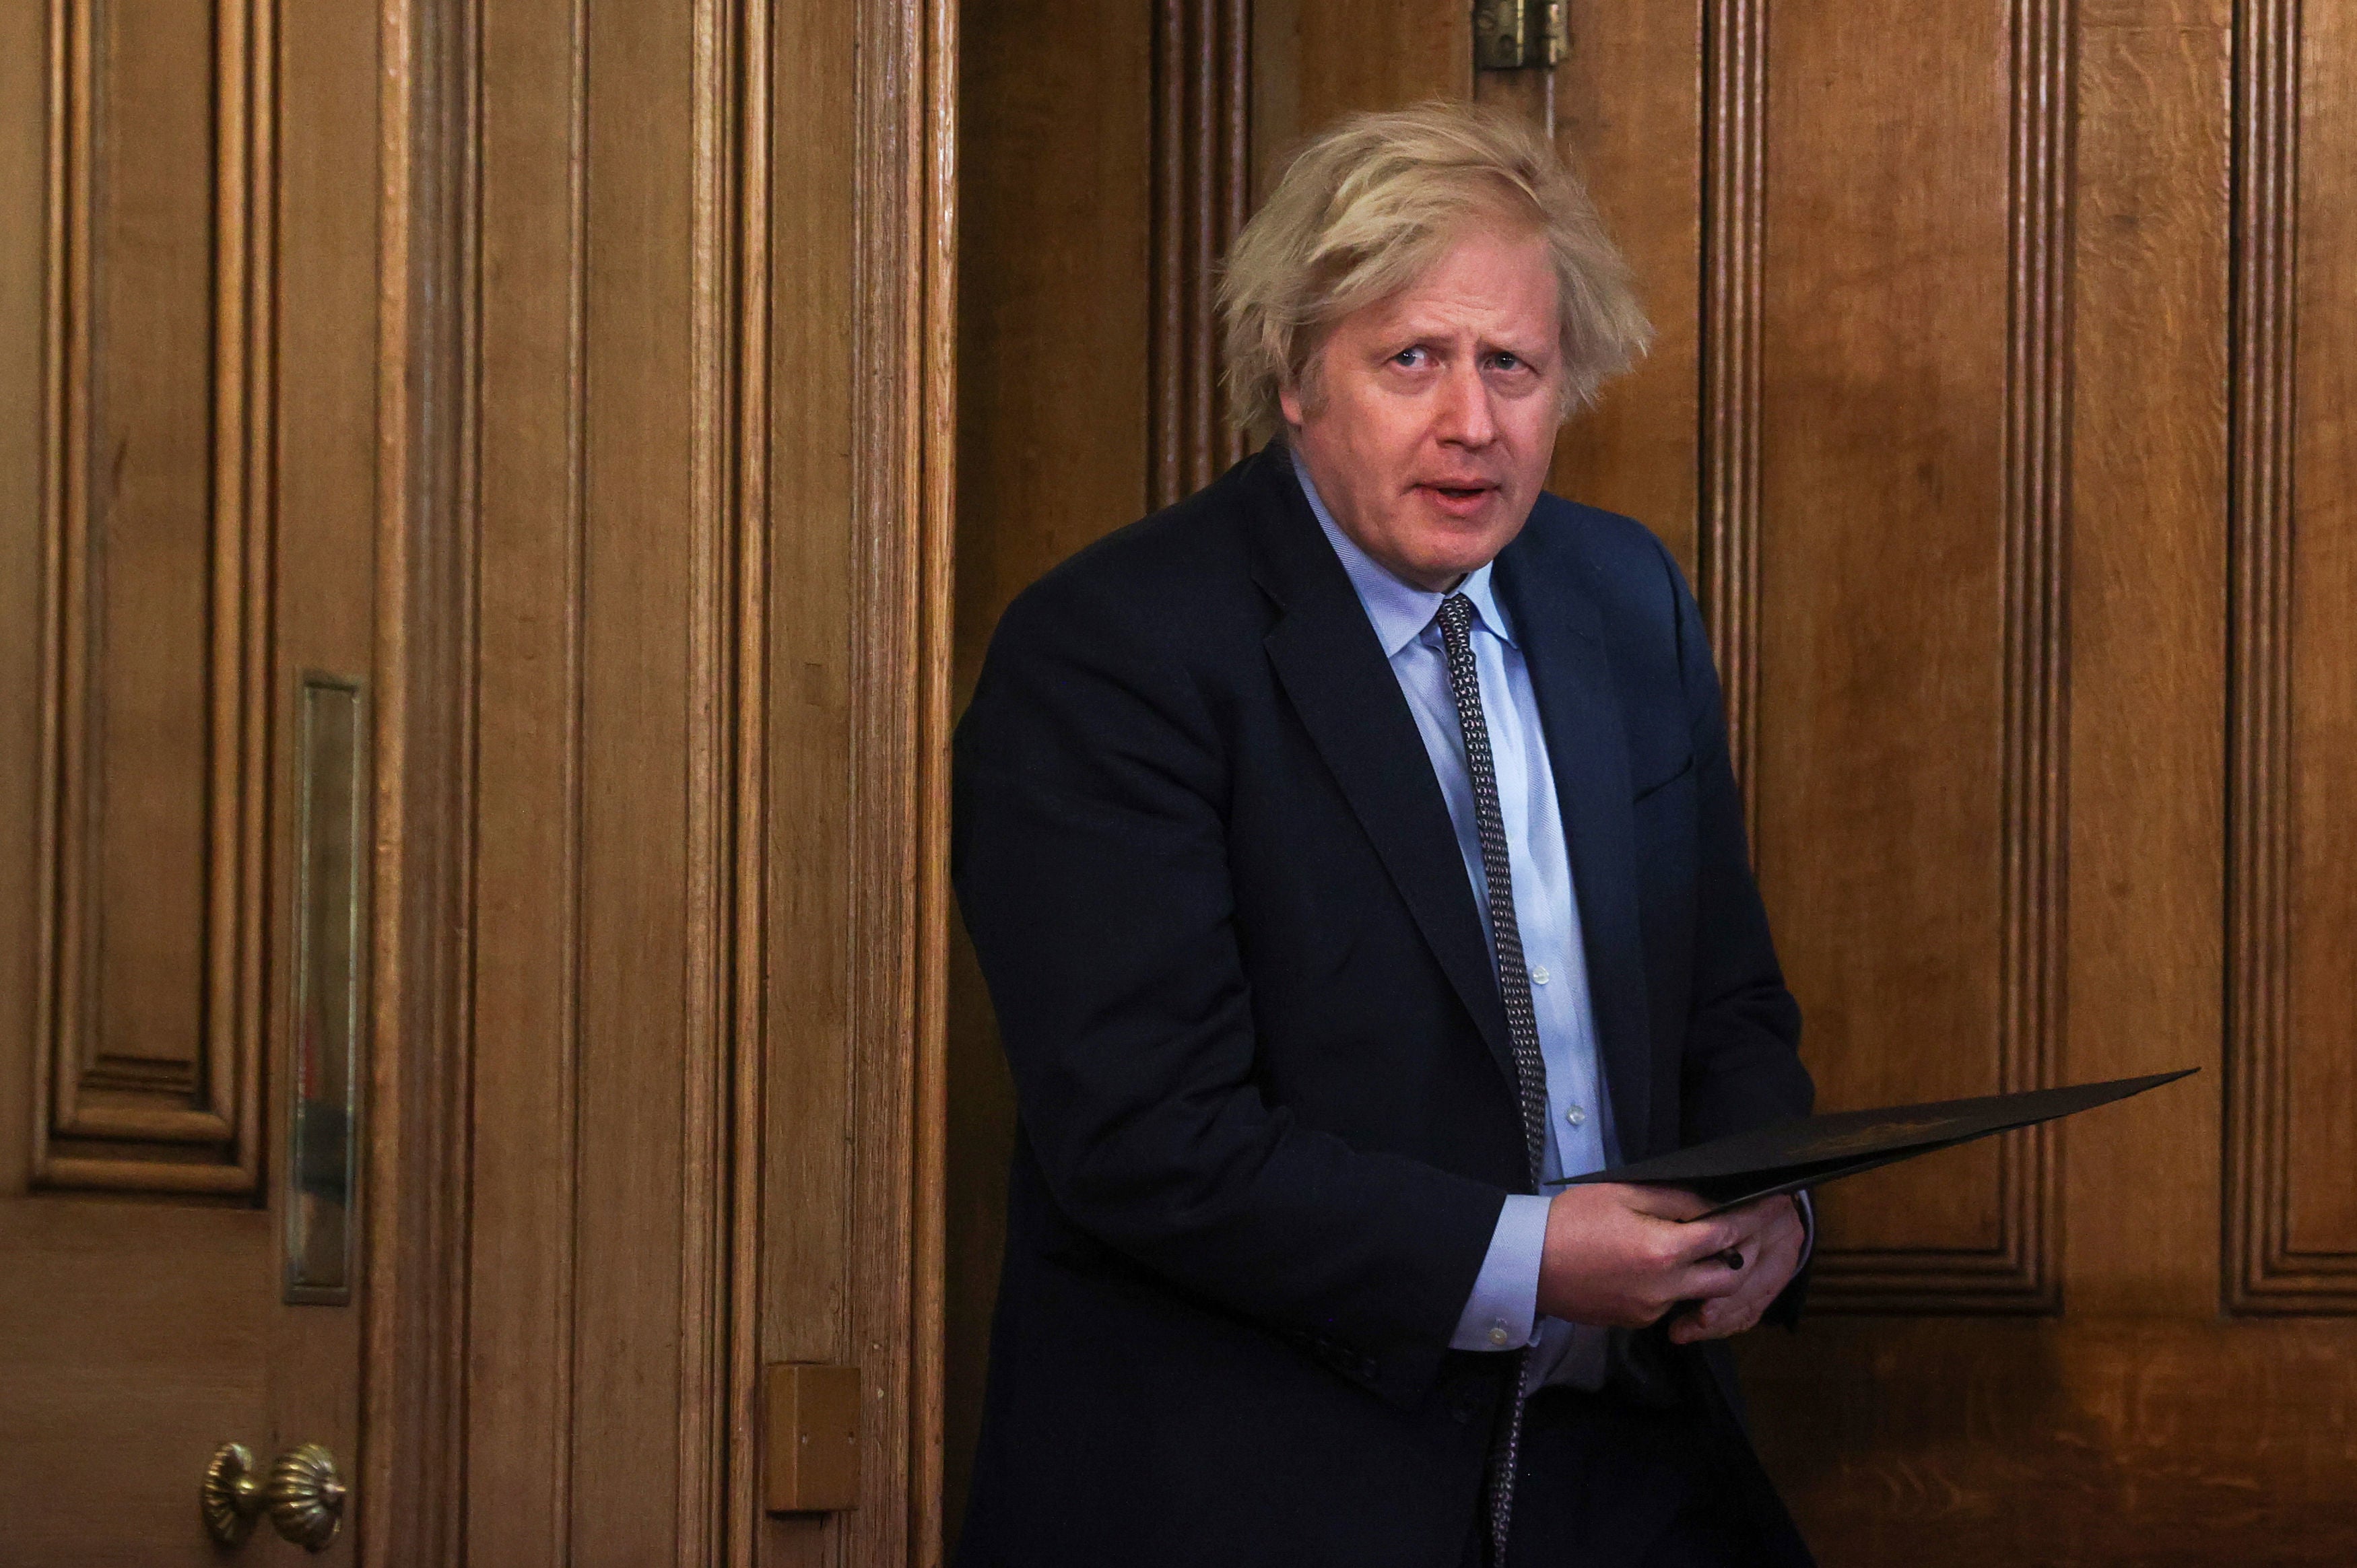 Boris Johnson is likely to do a deal with his anti-lockdown rebels